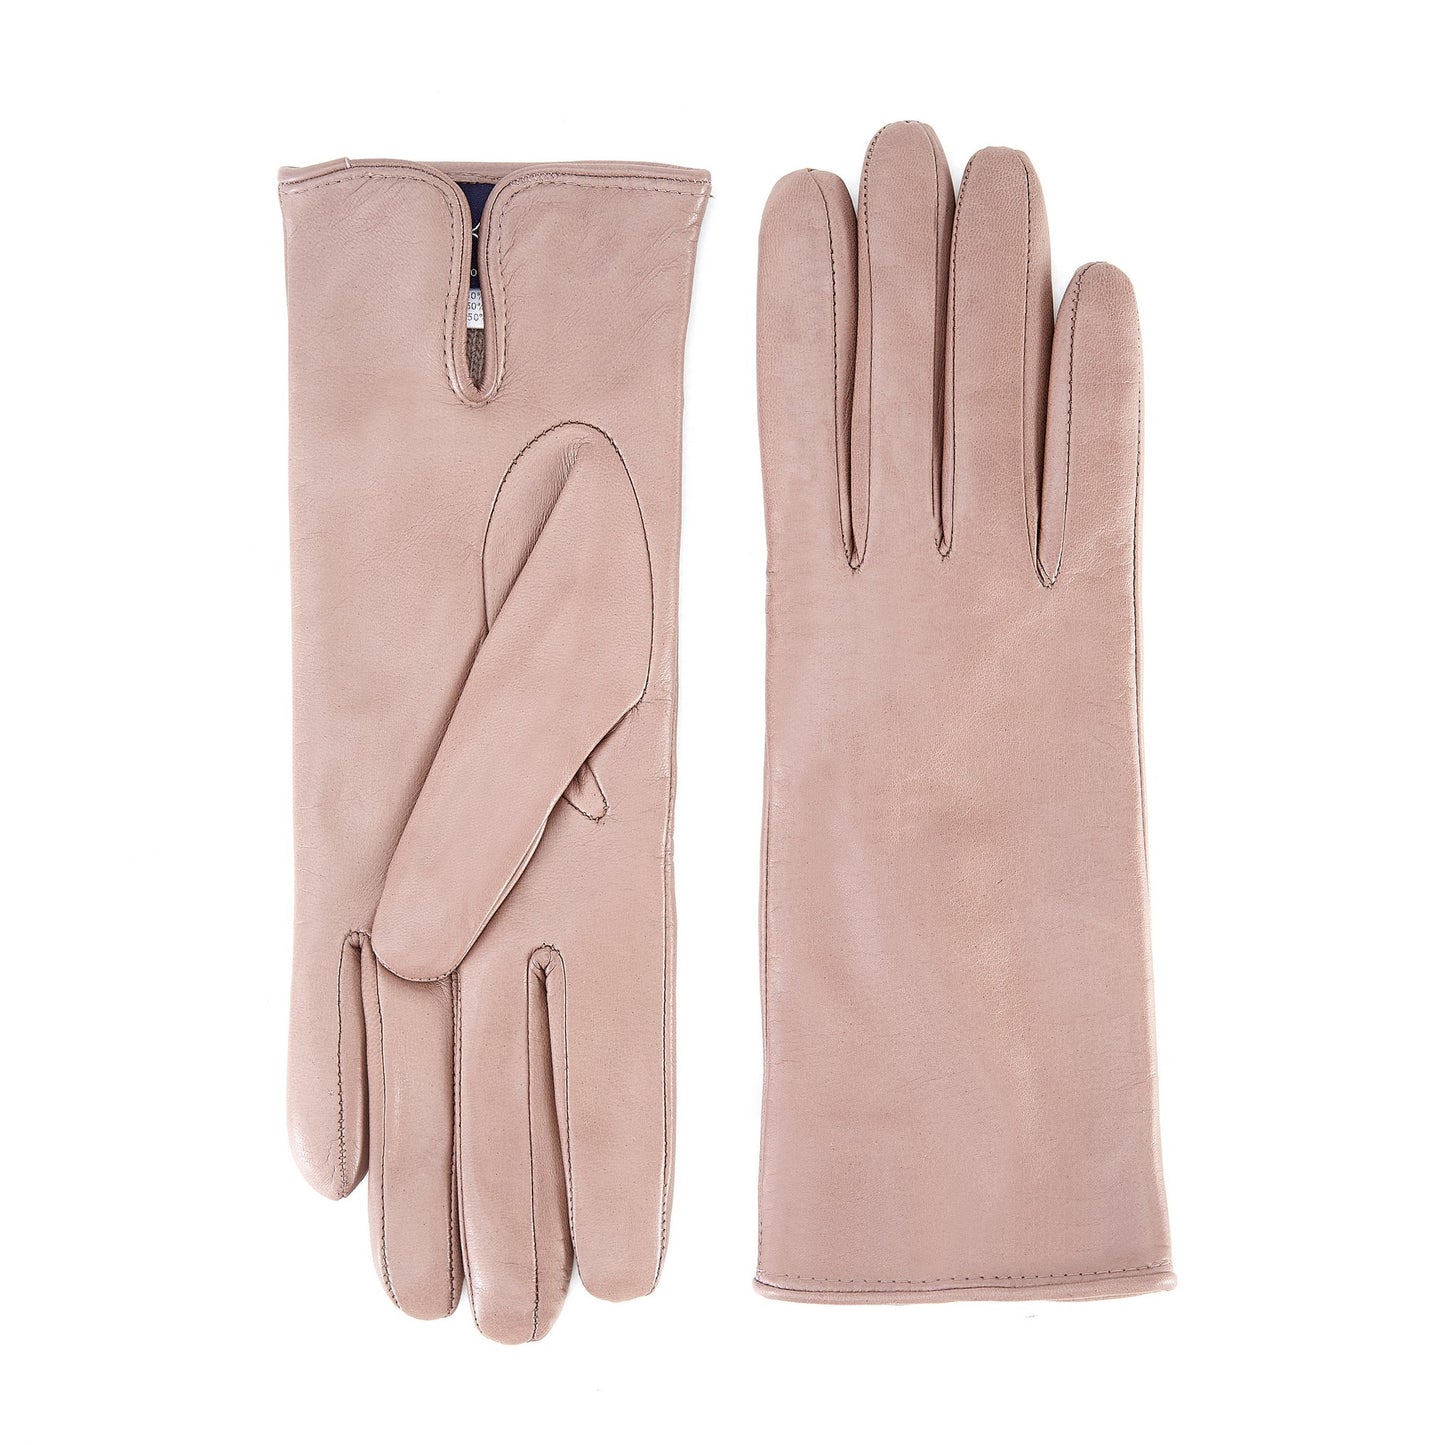 Women’s basic taupe soft nappa leather gloves with palm opening and mix cashmere lining